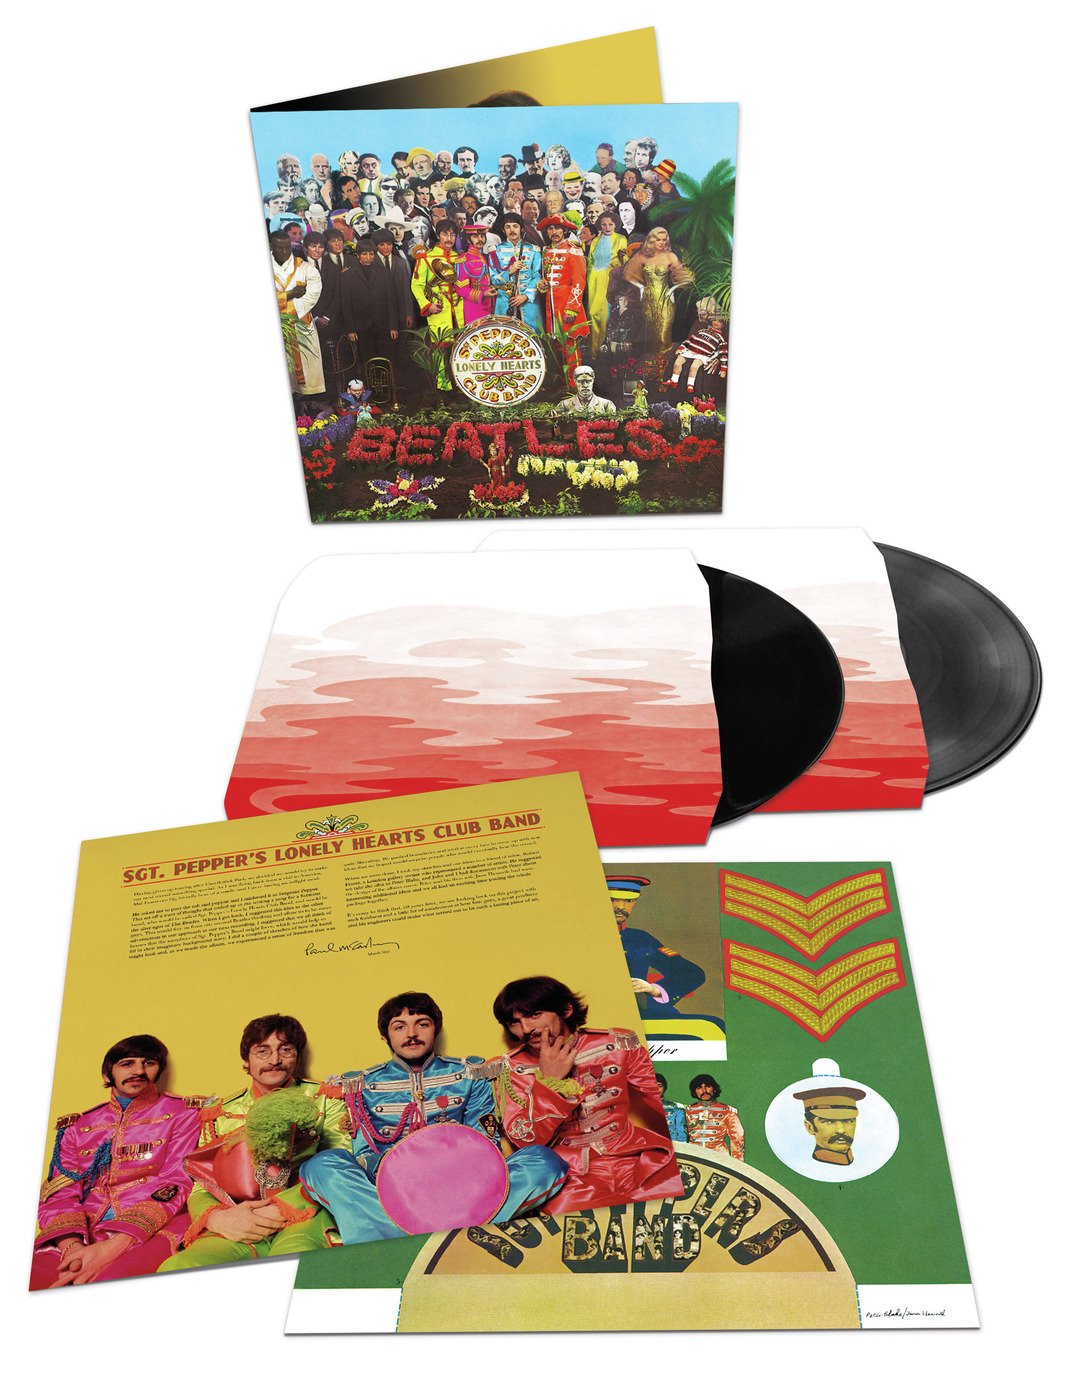 The Beatles Sgt Peppers Lonely Hearts Club Band Deluxe Vinyl Review